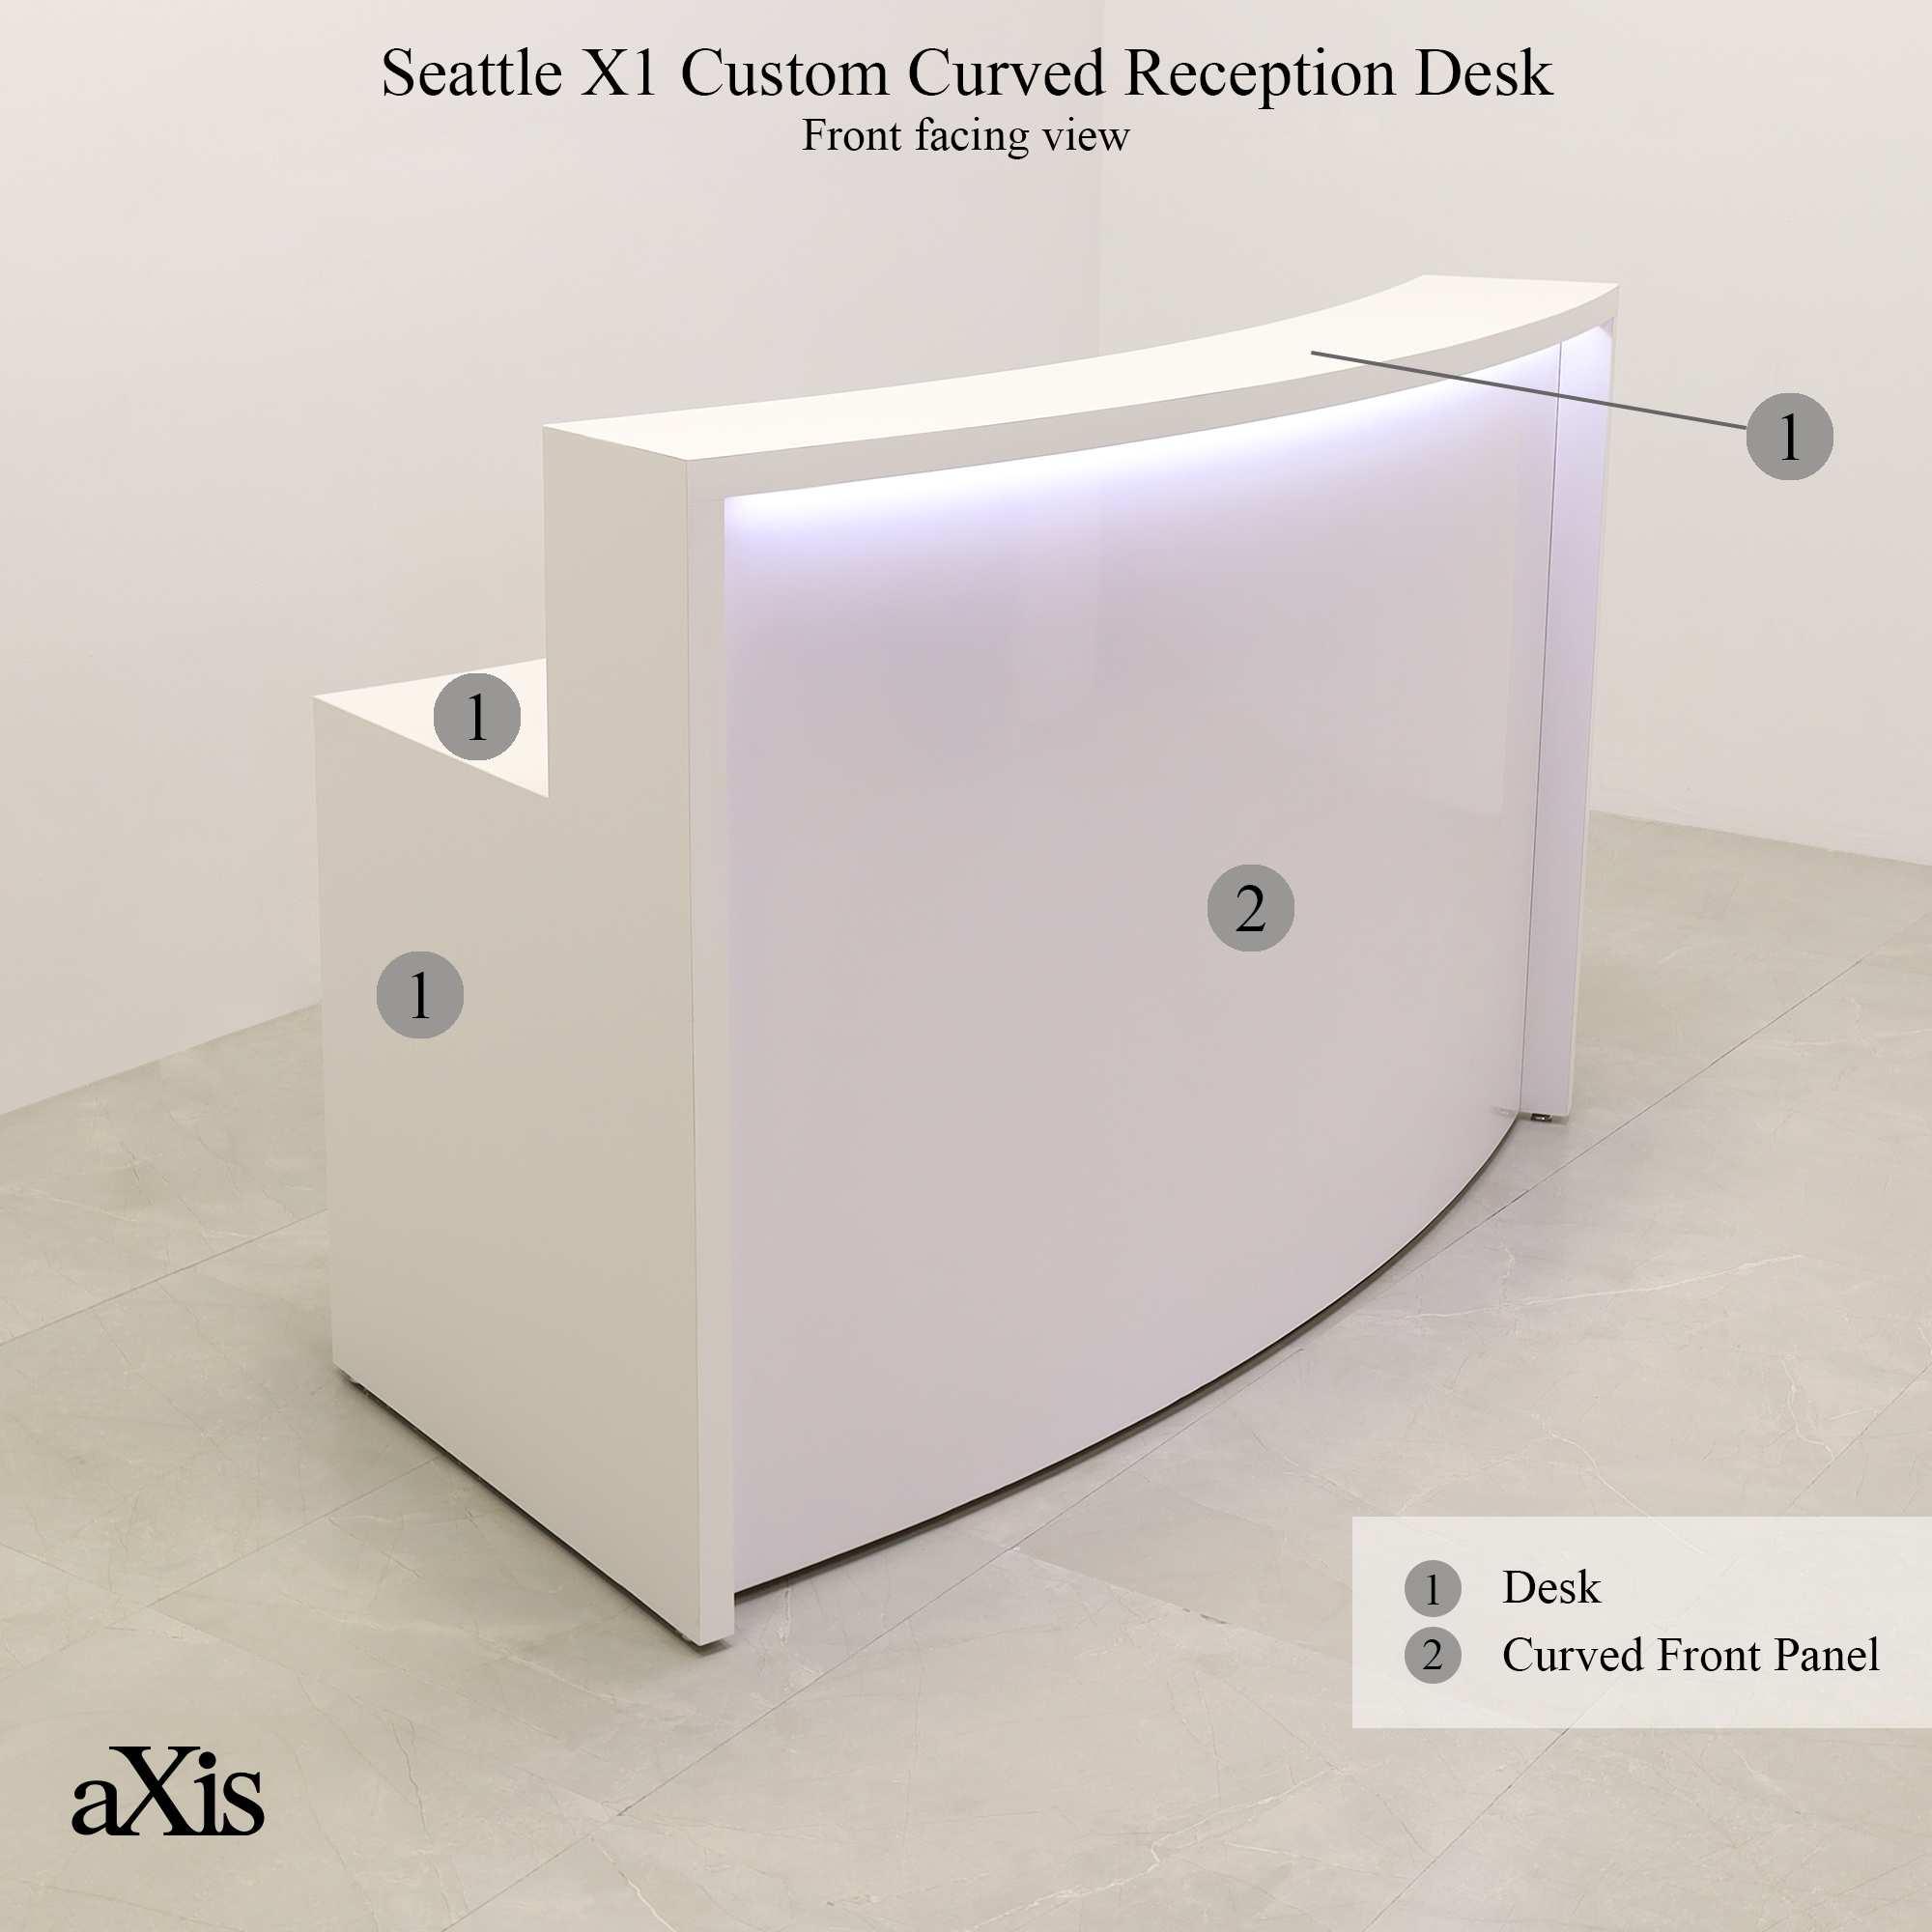 Seattle X1 Custom Reception Desk in white matte laminate desk and curved front panel, with white LED shown here.